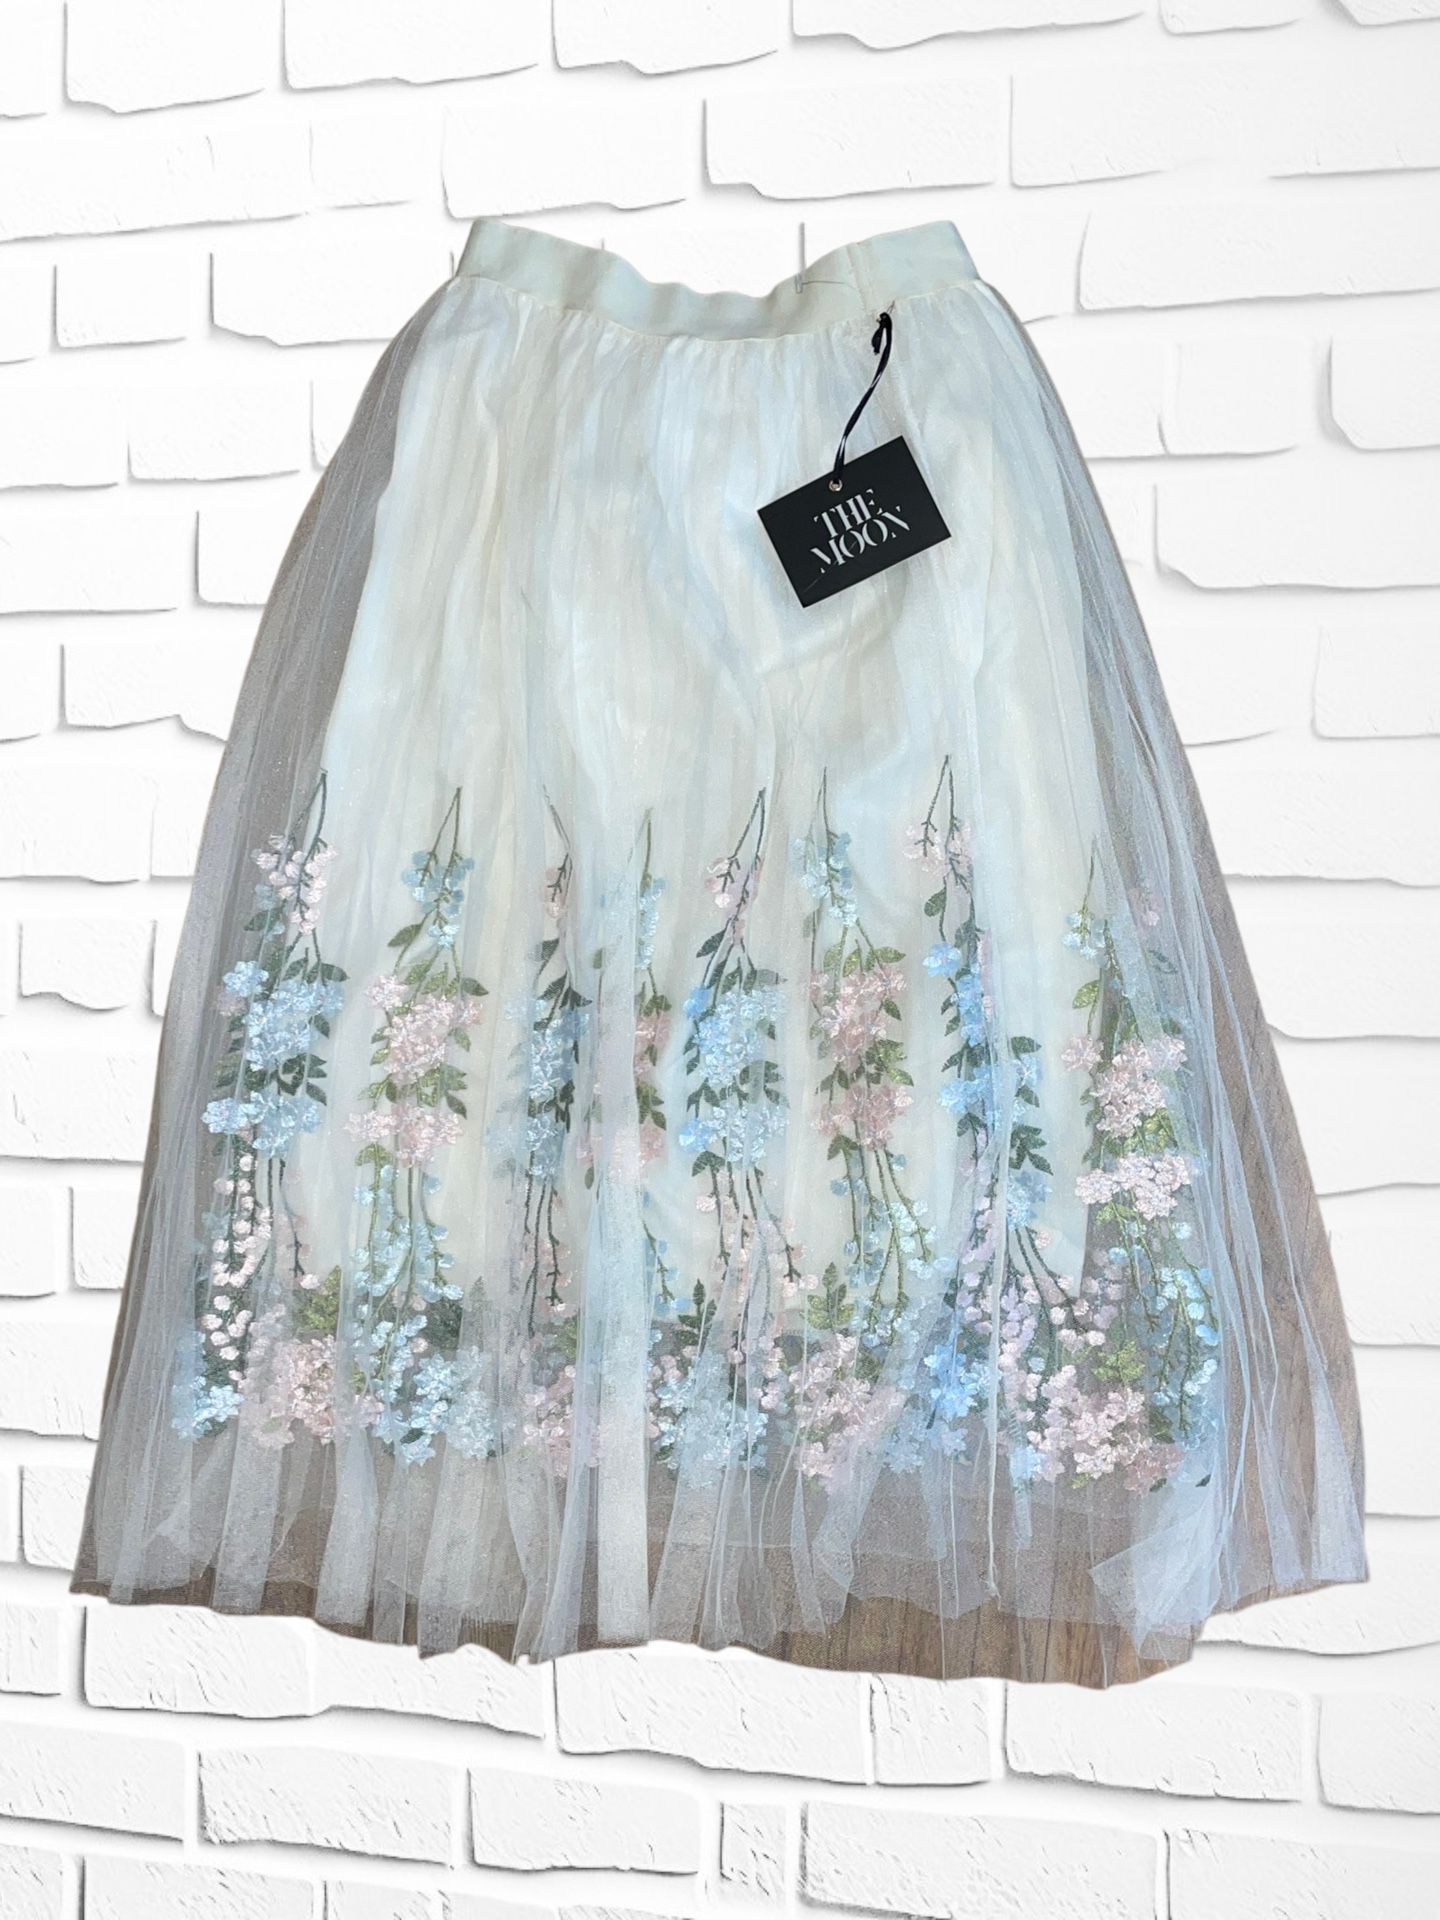 Moon Collection Los Angeles Women’s Size Small-Medium Tulle Floral Skirt • BNWT